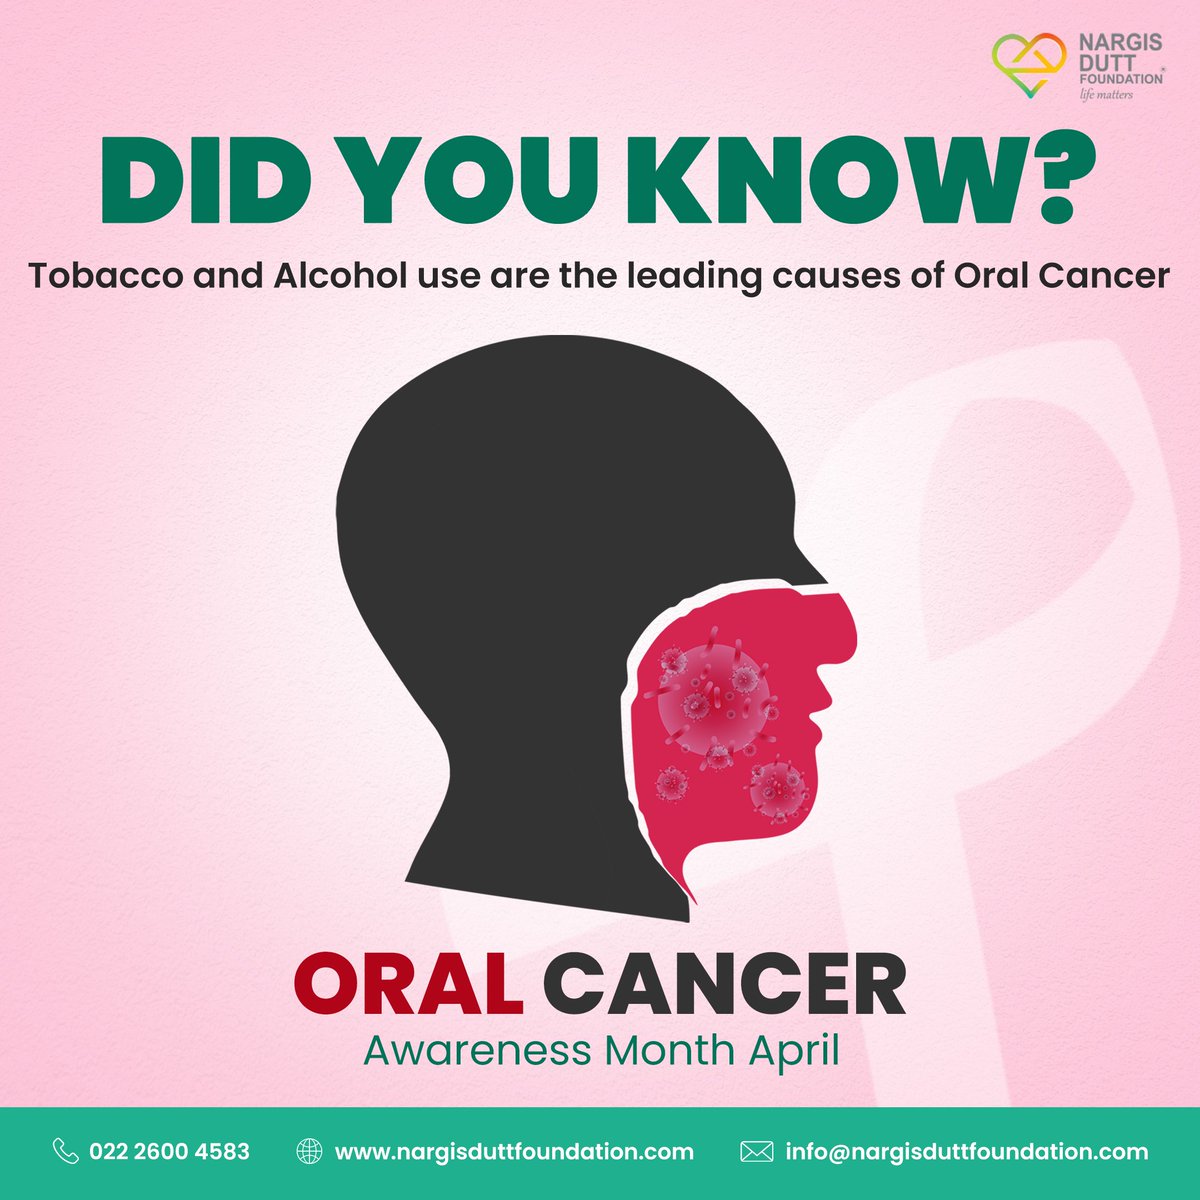 Many cases are diagnosed in advanced stages due to lack of awareness and routine screenings. During #OralCancerAwarenessMonth, let's raise awareness and make a difference in saving lives. #OralCancer #NDF #NargisDuttFoundation #CancerEarlyDetection #LifeMatters #TheresMoreToLife